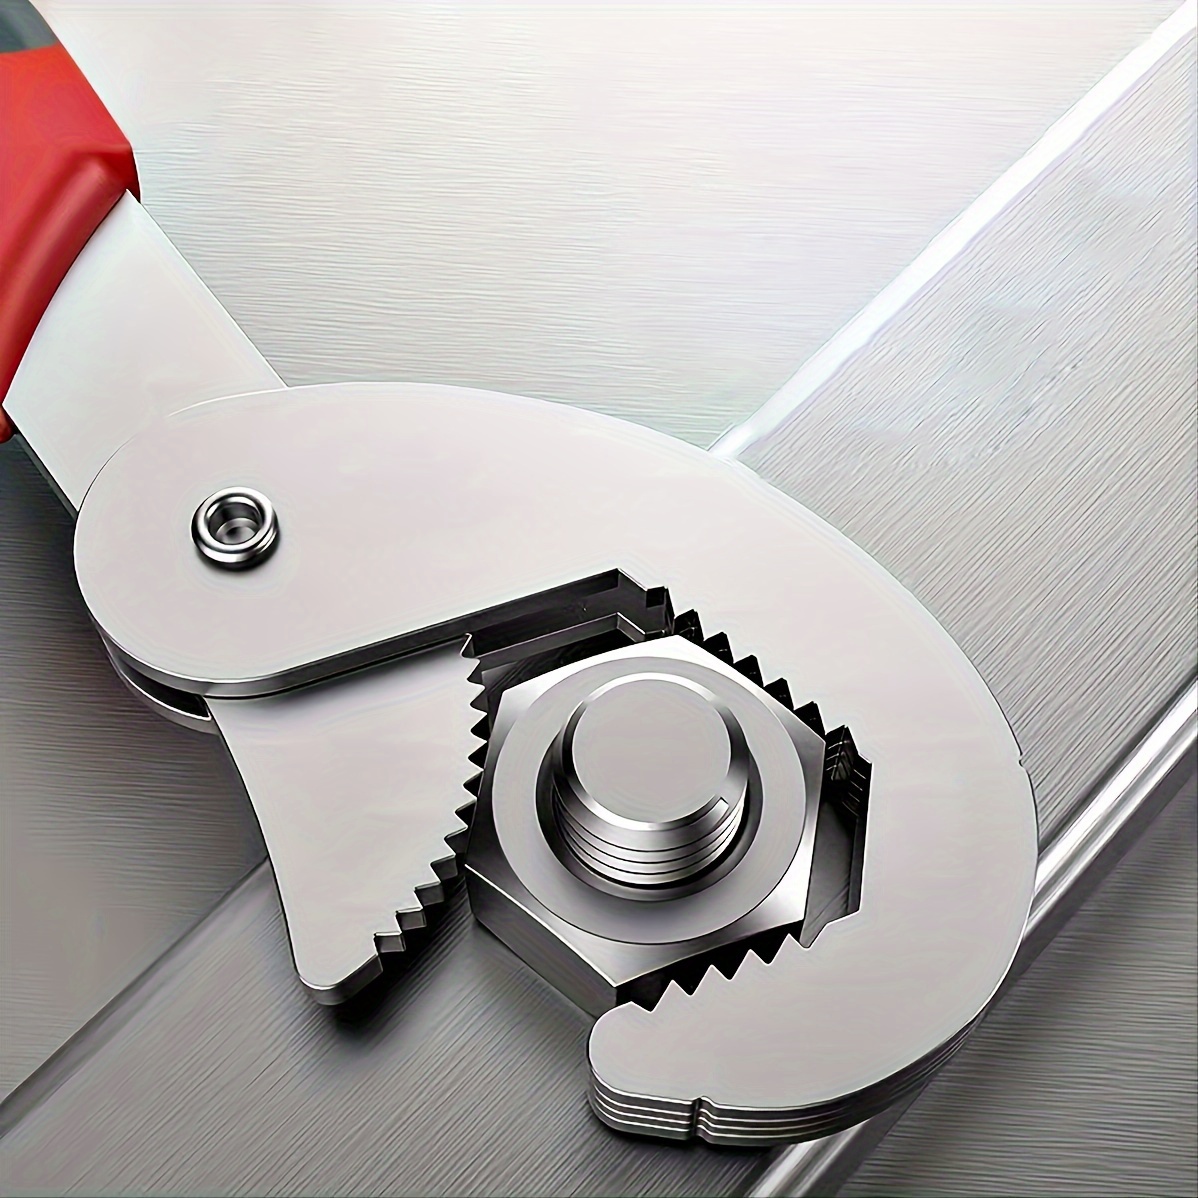 

Universal Adjustable Wrench Tool Set: Multifunctional Double-ended Pipe Wrench & Live Mouth Pliers For All Your Diy Needs!